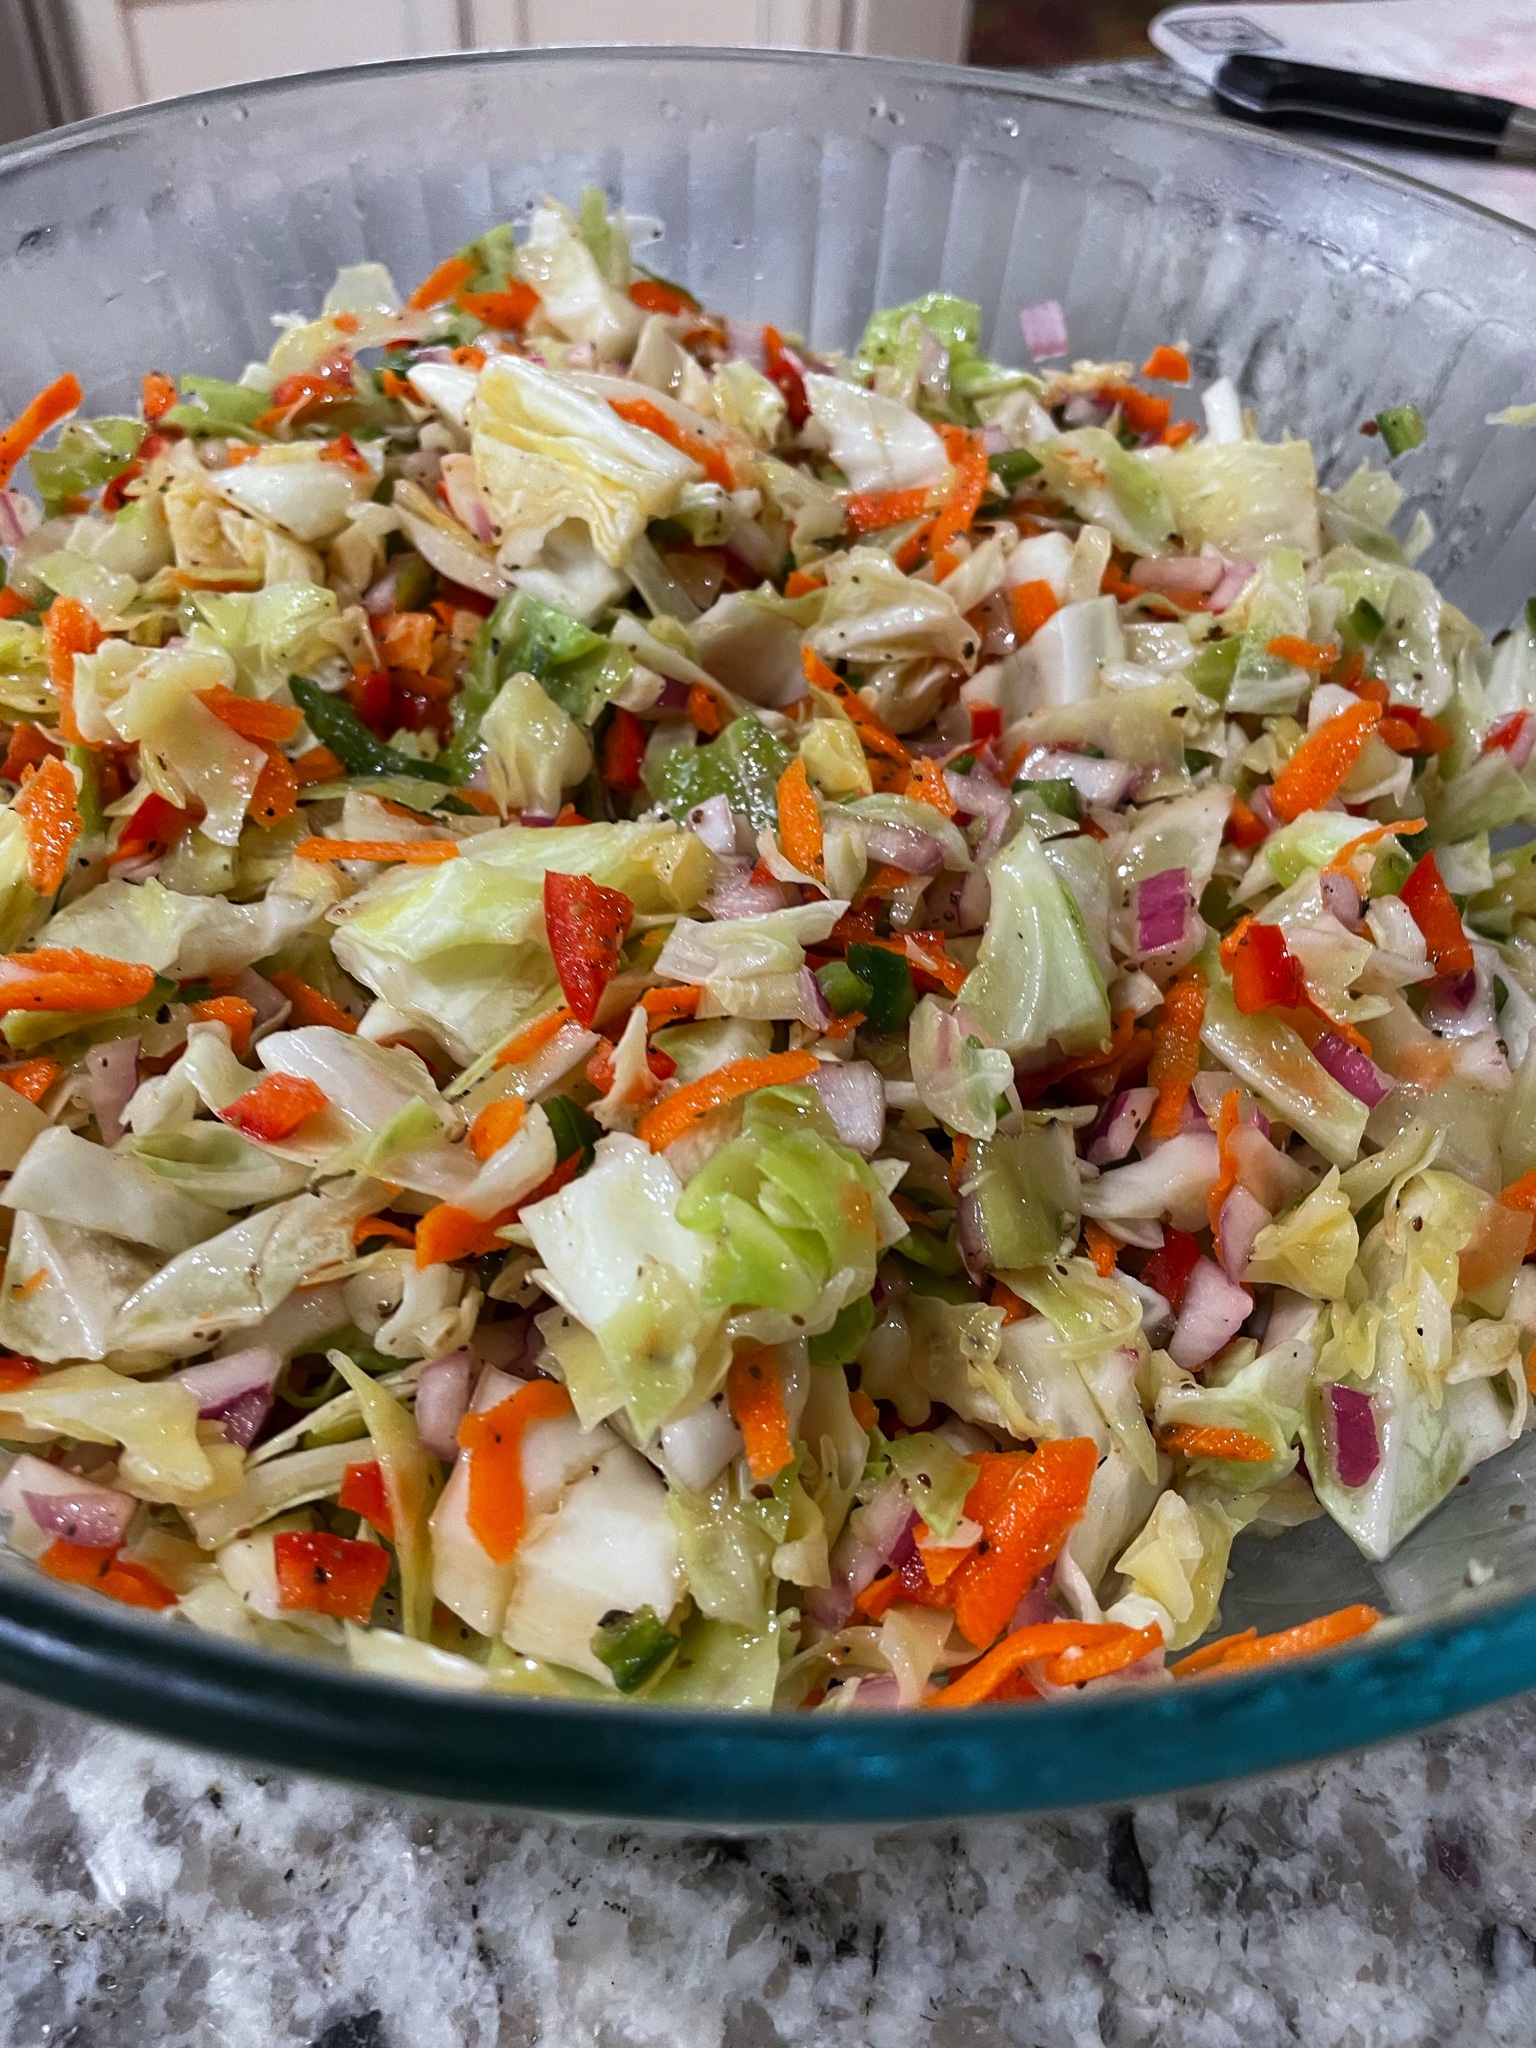 Coleslaw from Meathead